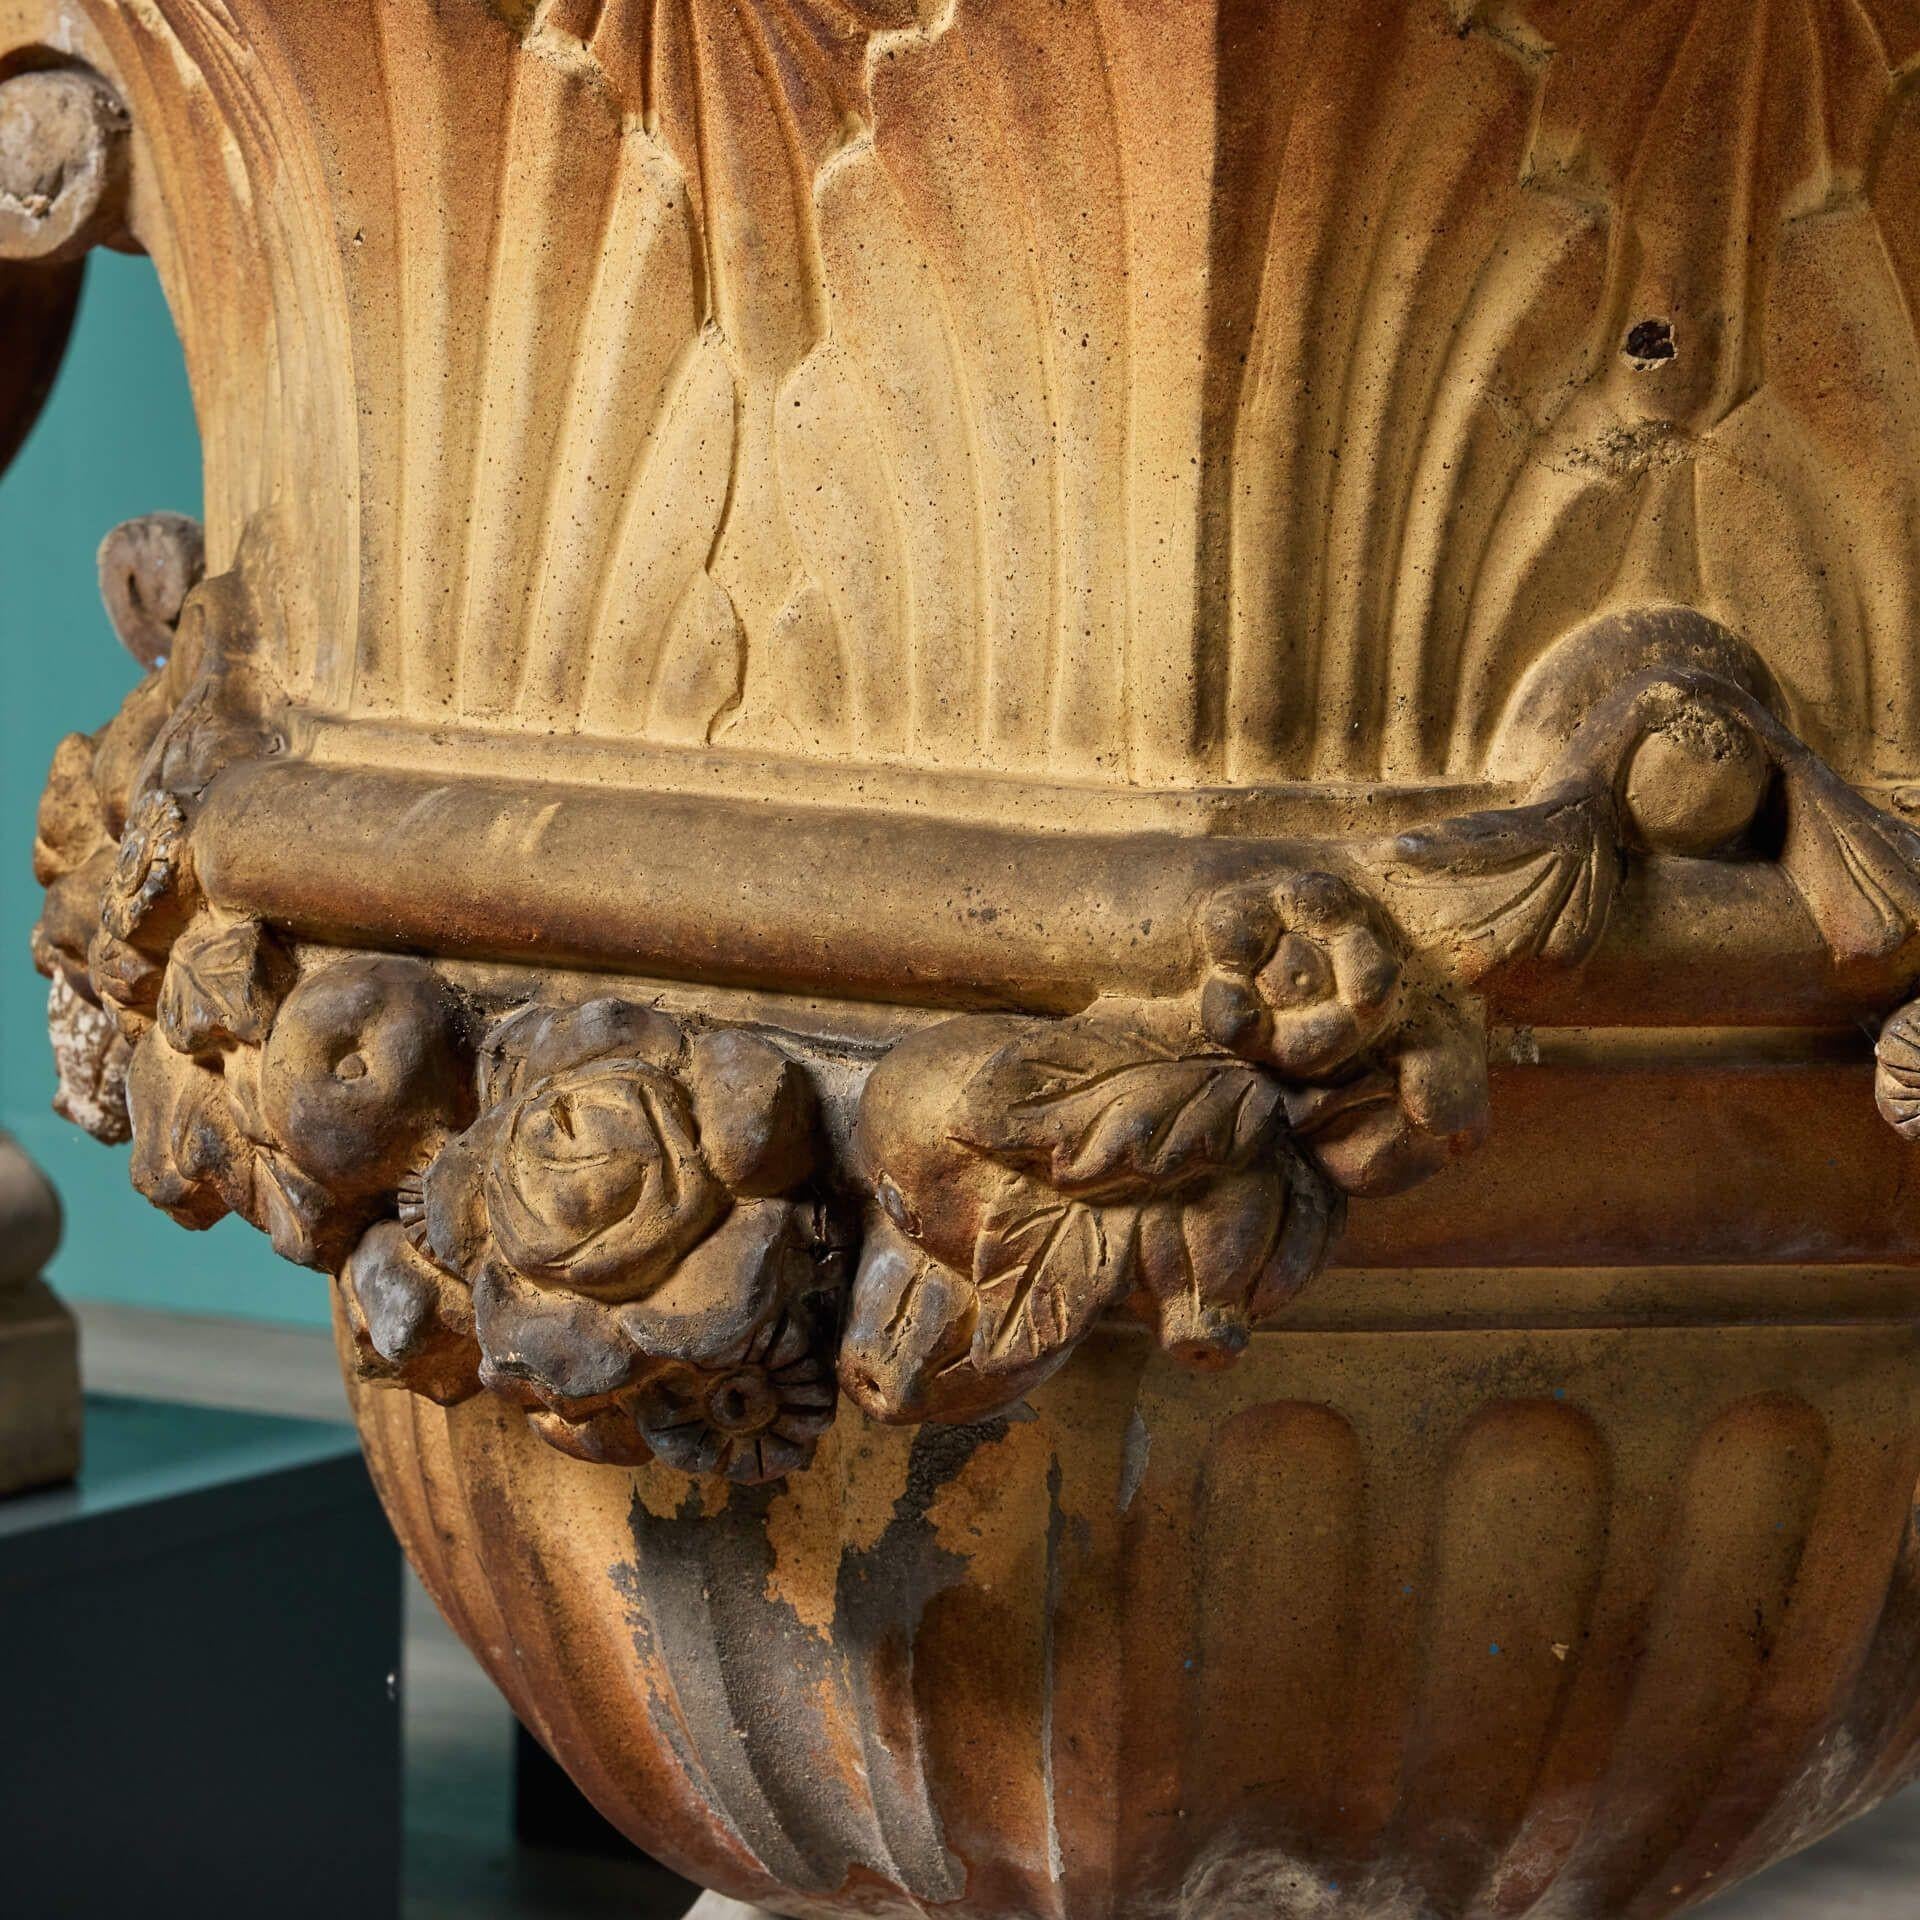 Rare Set of 4 Large English Antique Terracotta Garden Urns In Fair Condition For Sale In Wormelow, Herefordshire